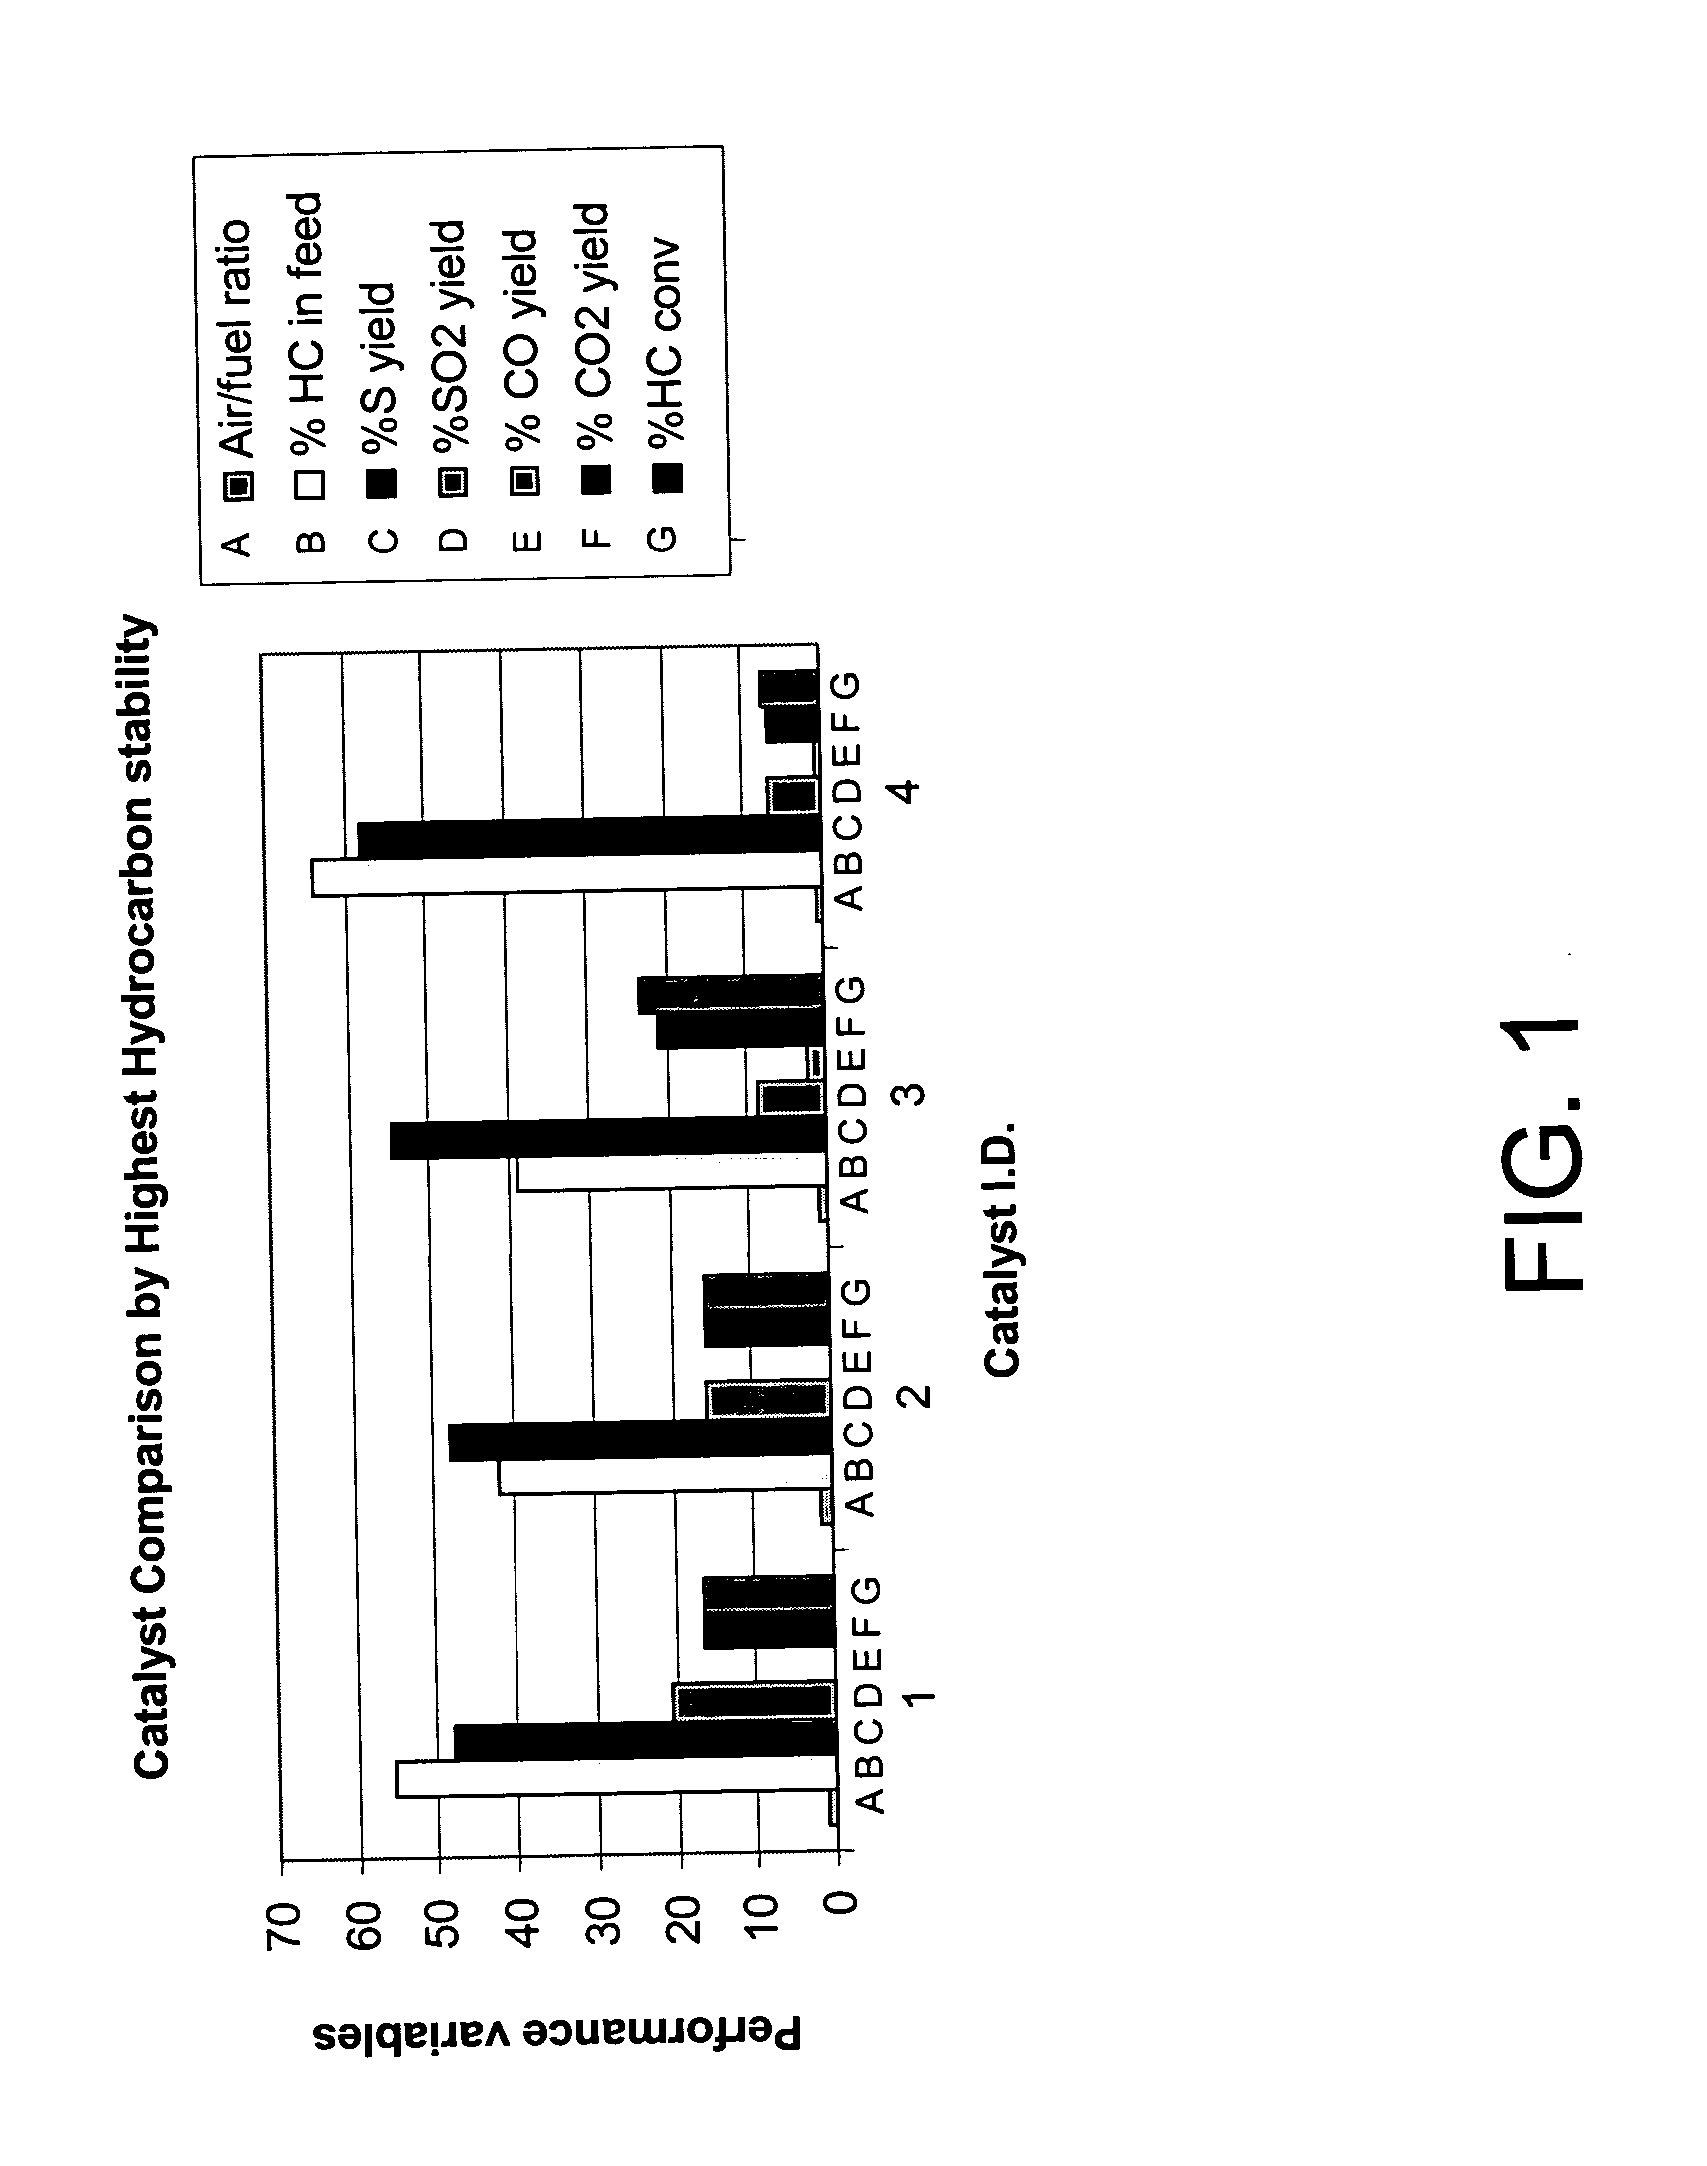 Apparatus and catalytic partial oxidation process for recovering sulfur from an H2S-containing gas stream